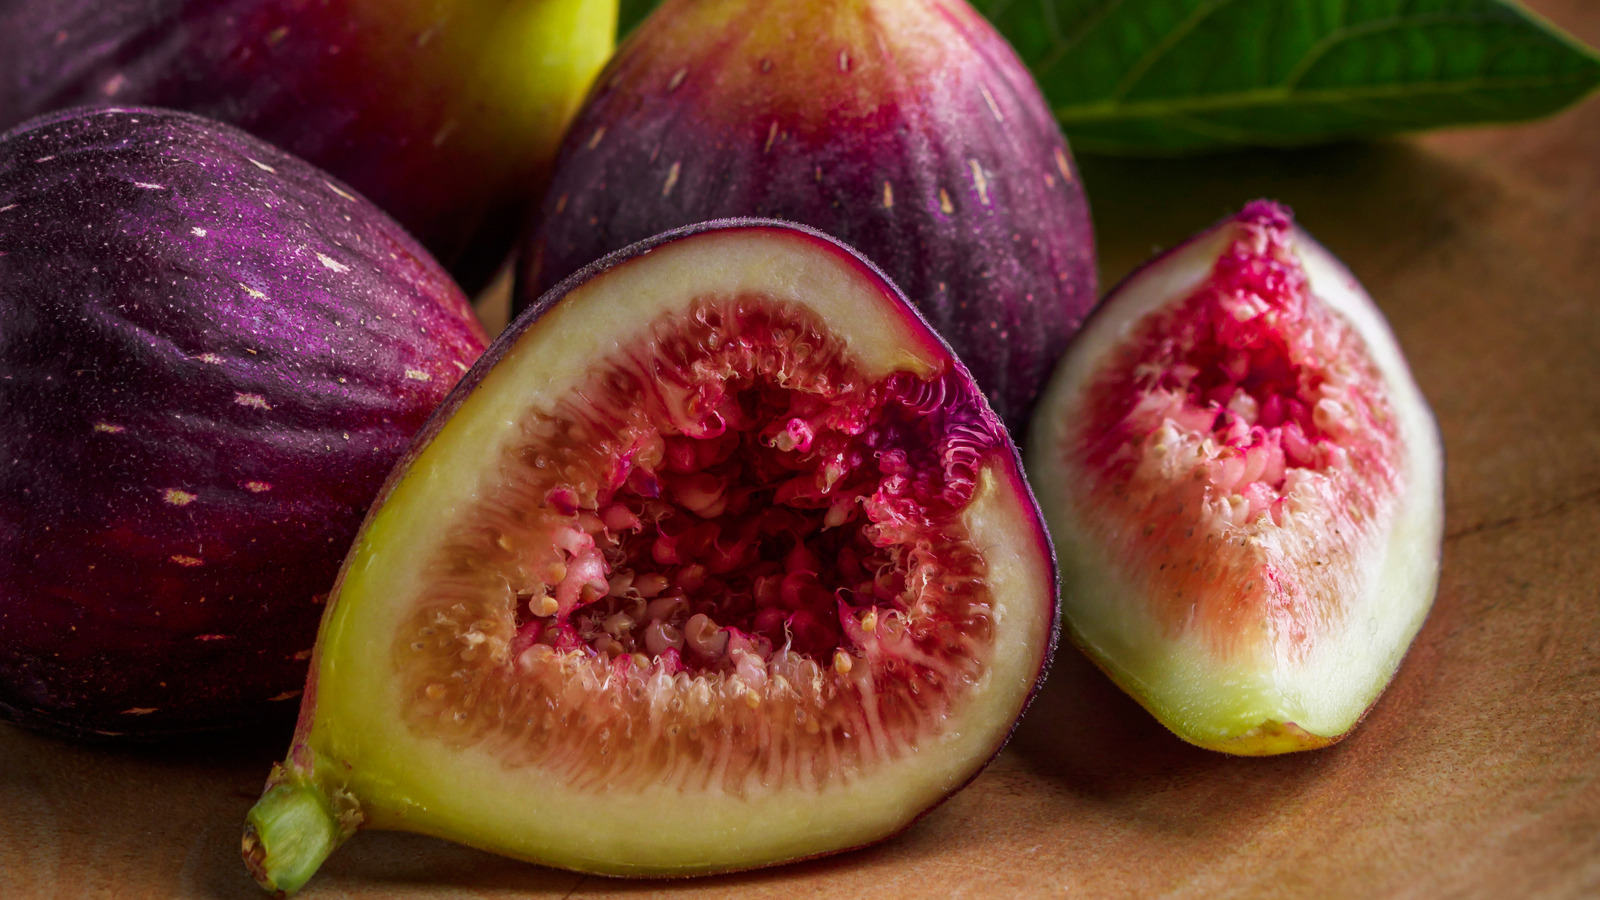 This Side Effect Might Change Your Mind About Eating Figs